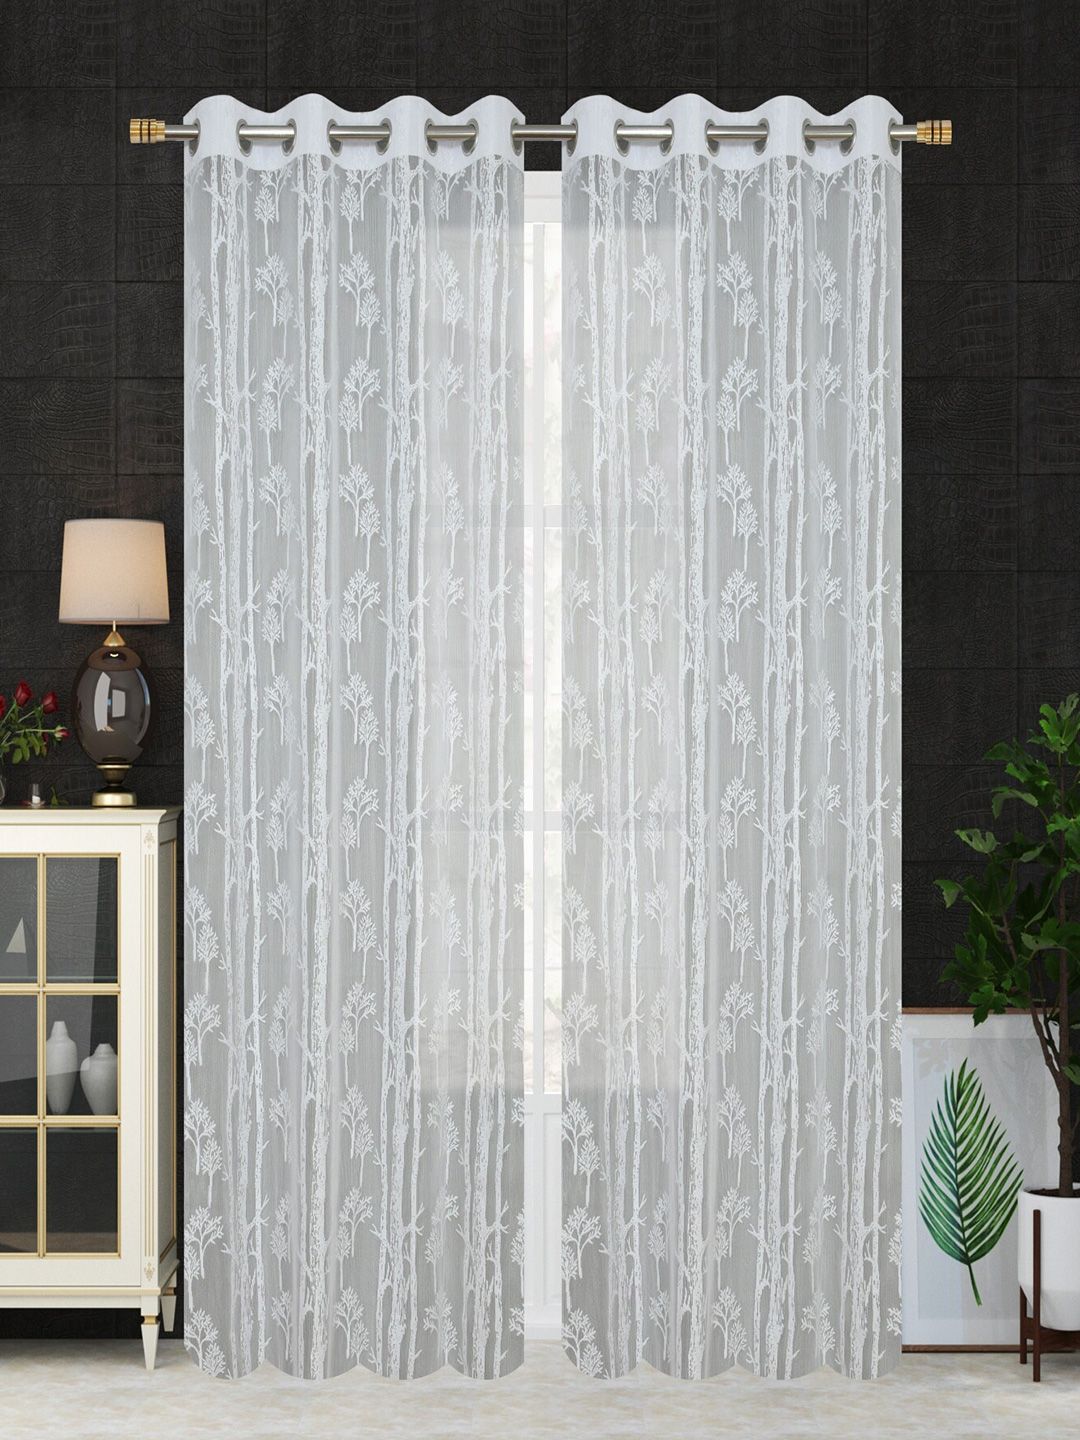 Homefab India Unisex White Curtains and Sheers Price in India